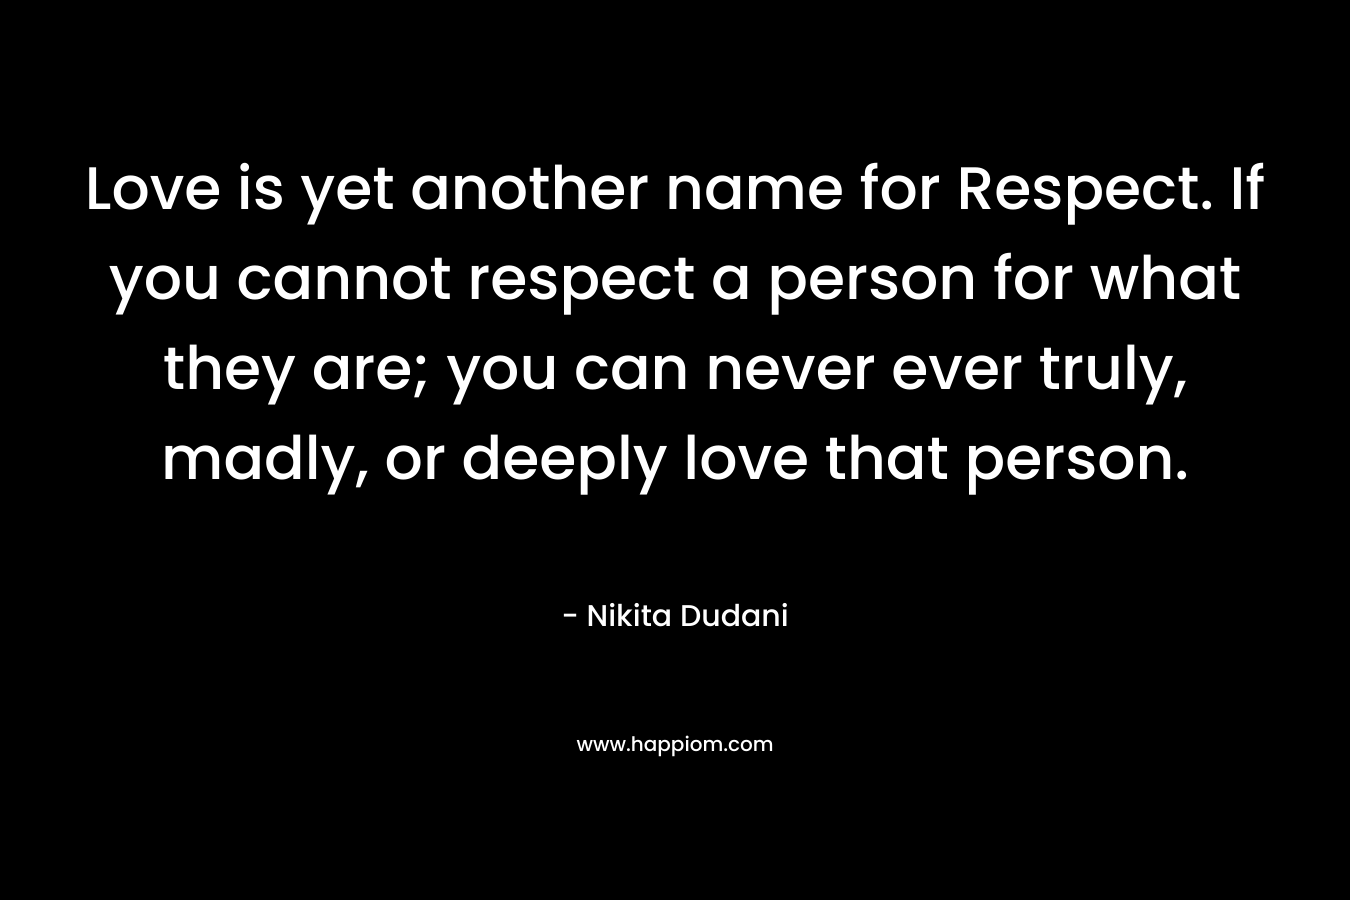 Love is yet another name for Respect. If you cannot respect a person for what they are; you can never ever truly, madly, or deeply love that person. – Nikita Dudani